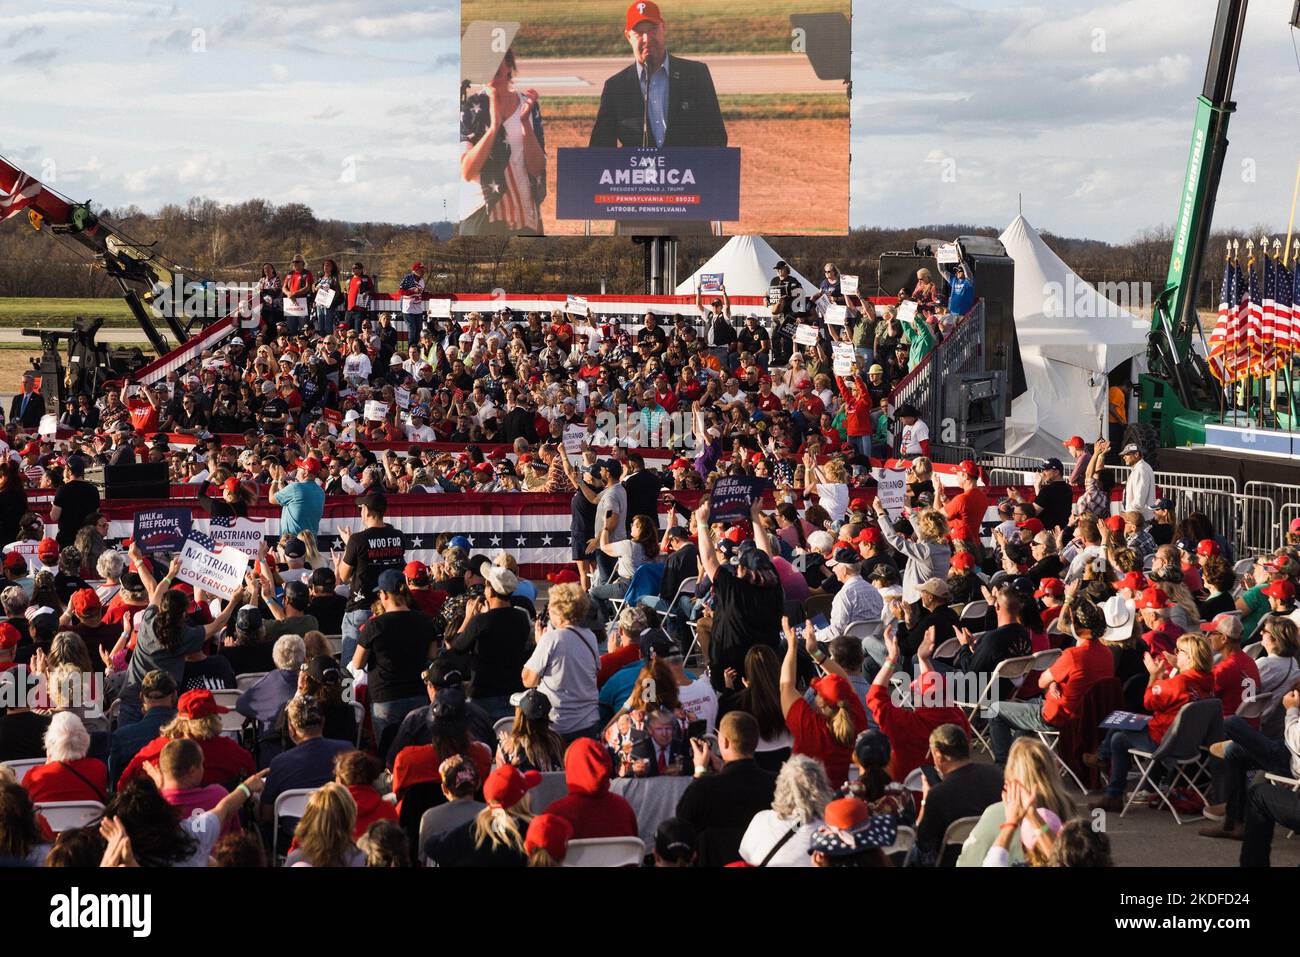 Latrobe, United States. 05th Nov, 2022. Guest speaker Doug Mastriano, a candidate for governor of Pennsylvania, speaks at rally organized by Trump at the Arnold Palmer Regional Airport in Latrobe, PA on November 5, 2022. (Photo by Elke Scholiers/Sipa USA) Credit: Sipa USA/Alamy Live News Stock Photo